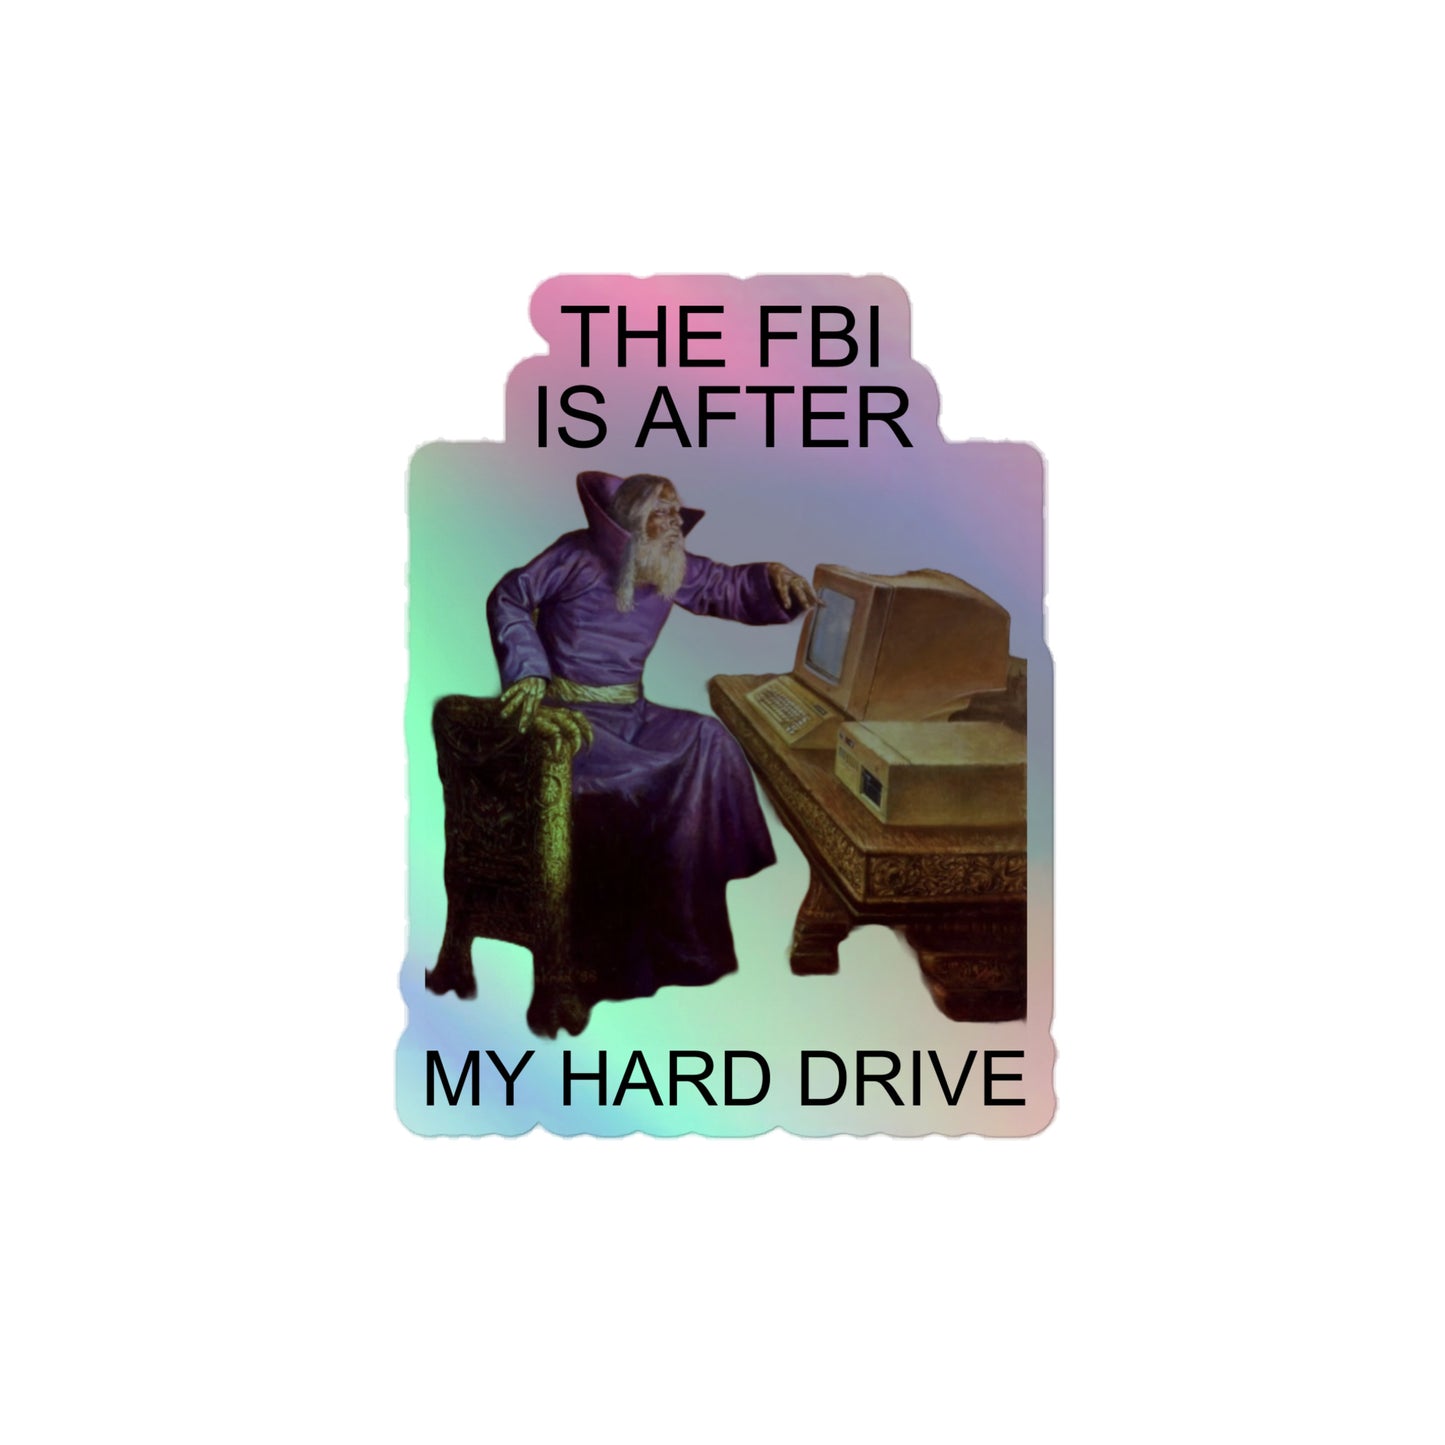 The fbi is after my hard drive (sticker)